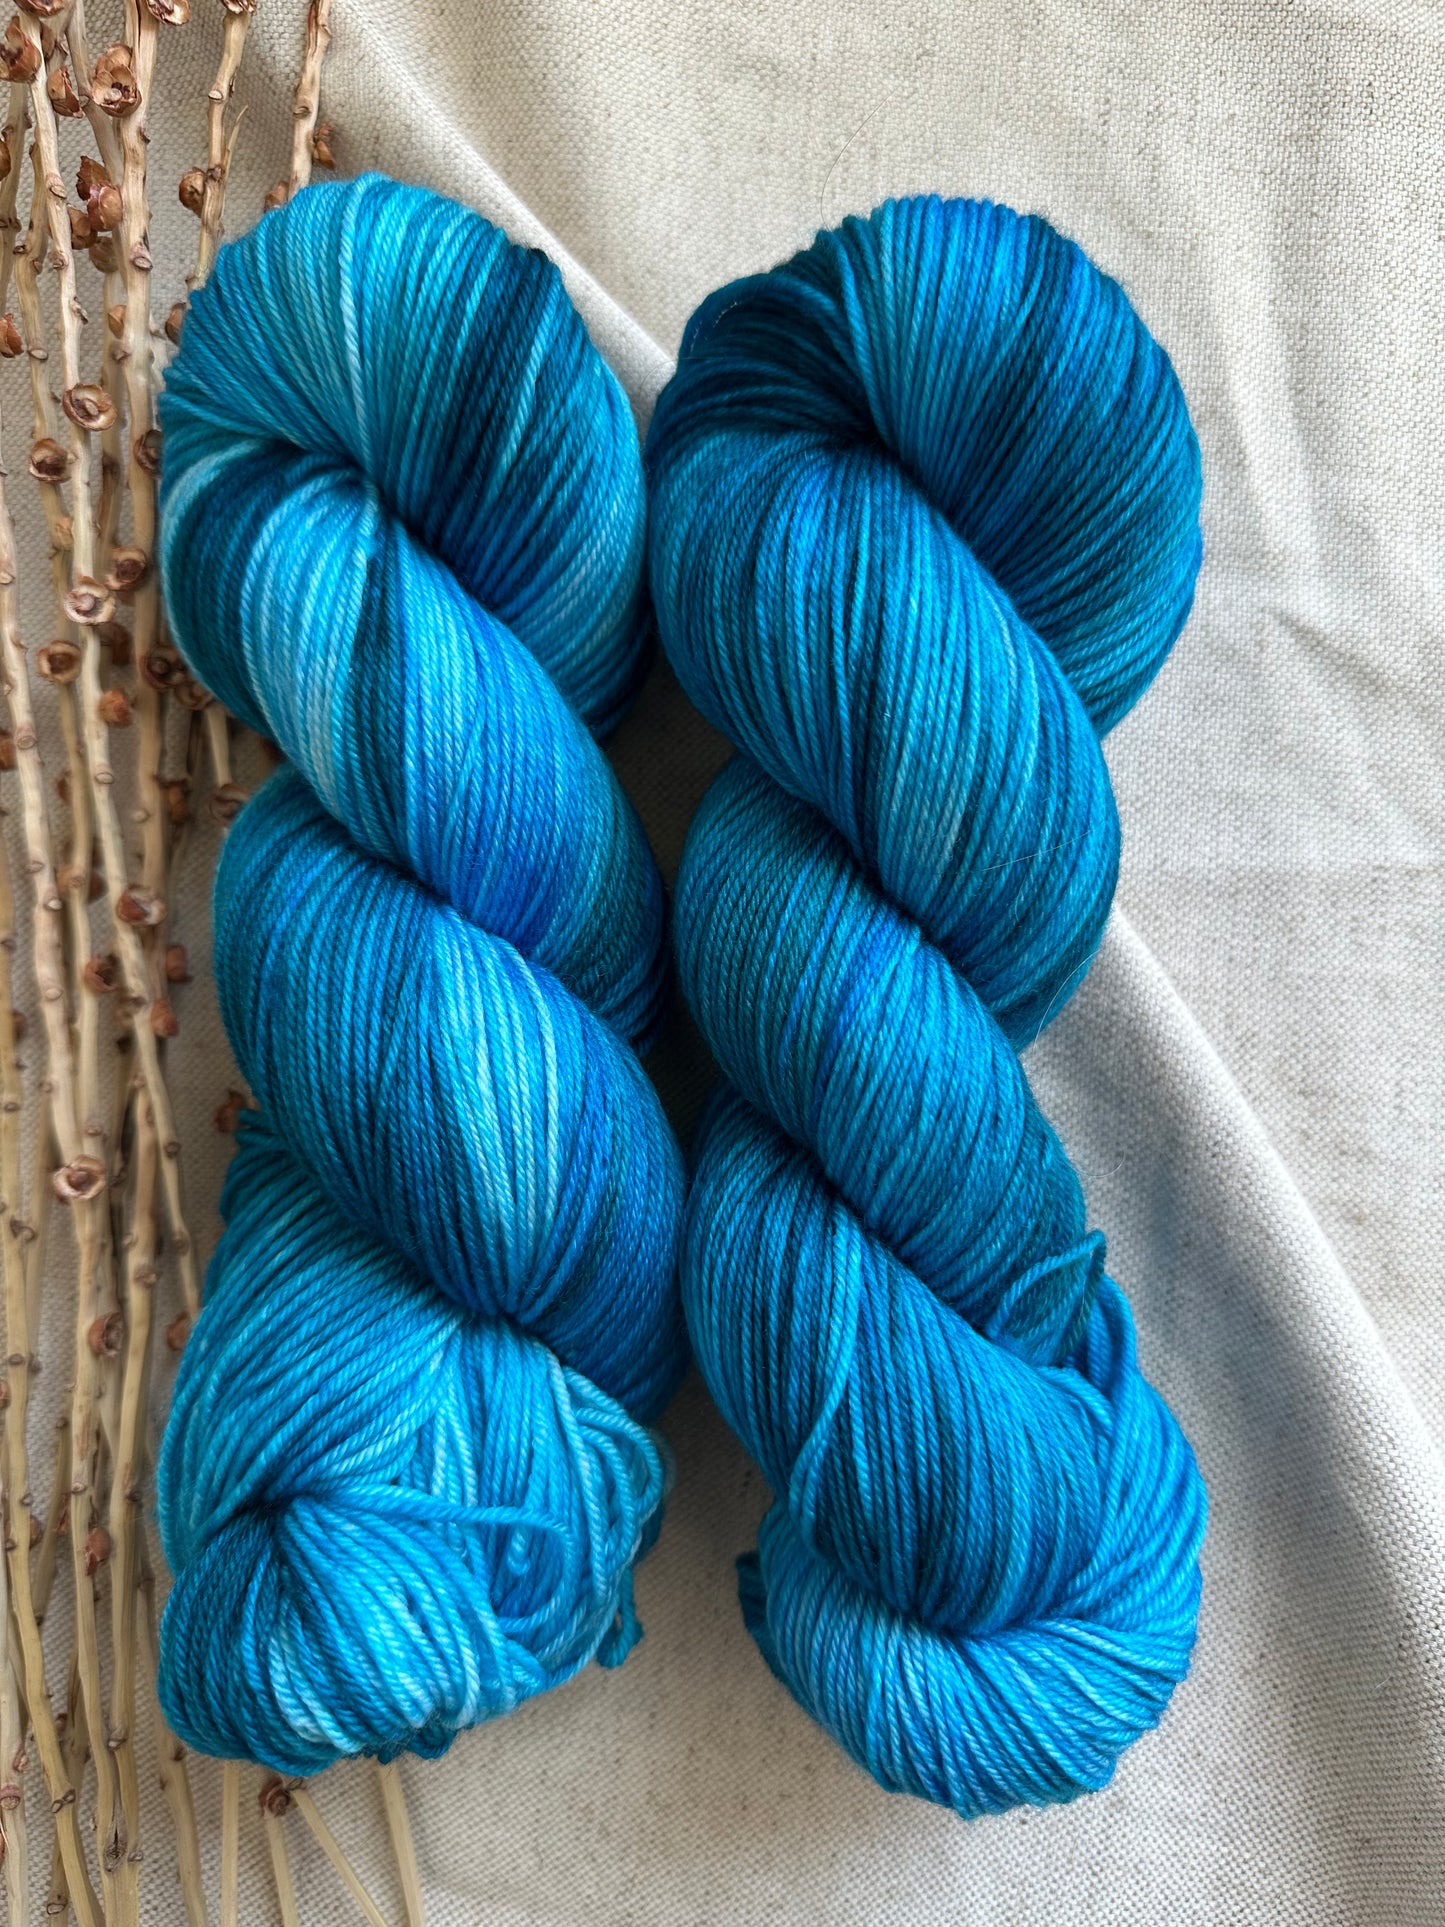 Shades of Turquoise 100g Skein